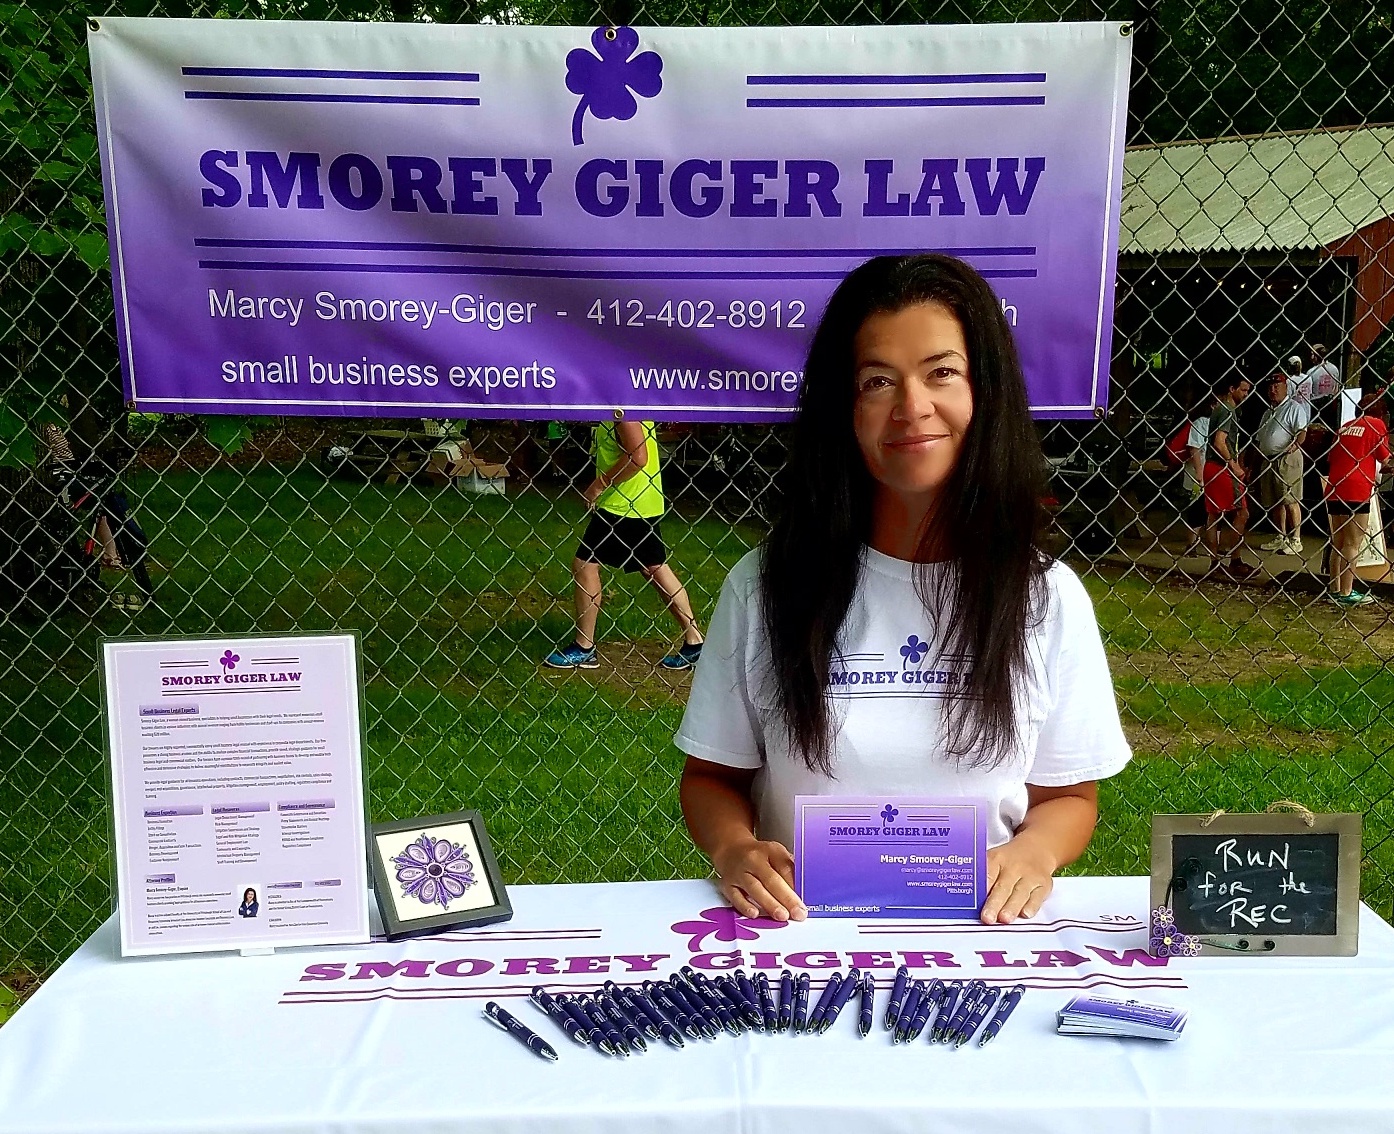 Smorey Giger Law sponsored The McKnight Village Civic Association - Run for the Rec